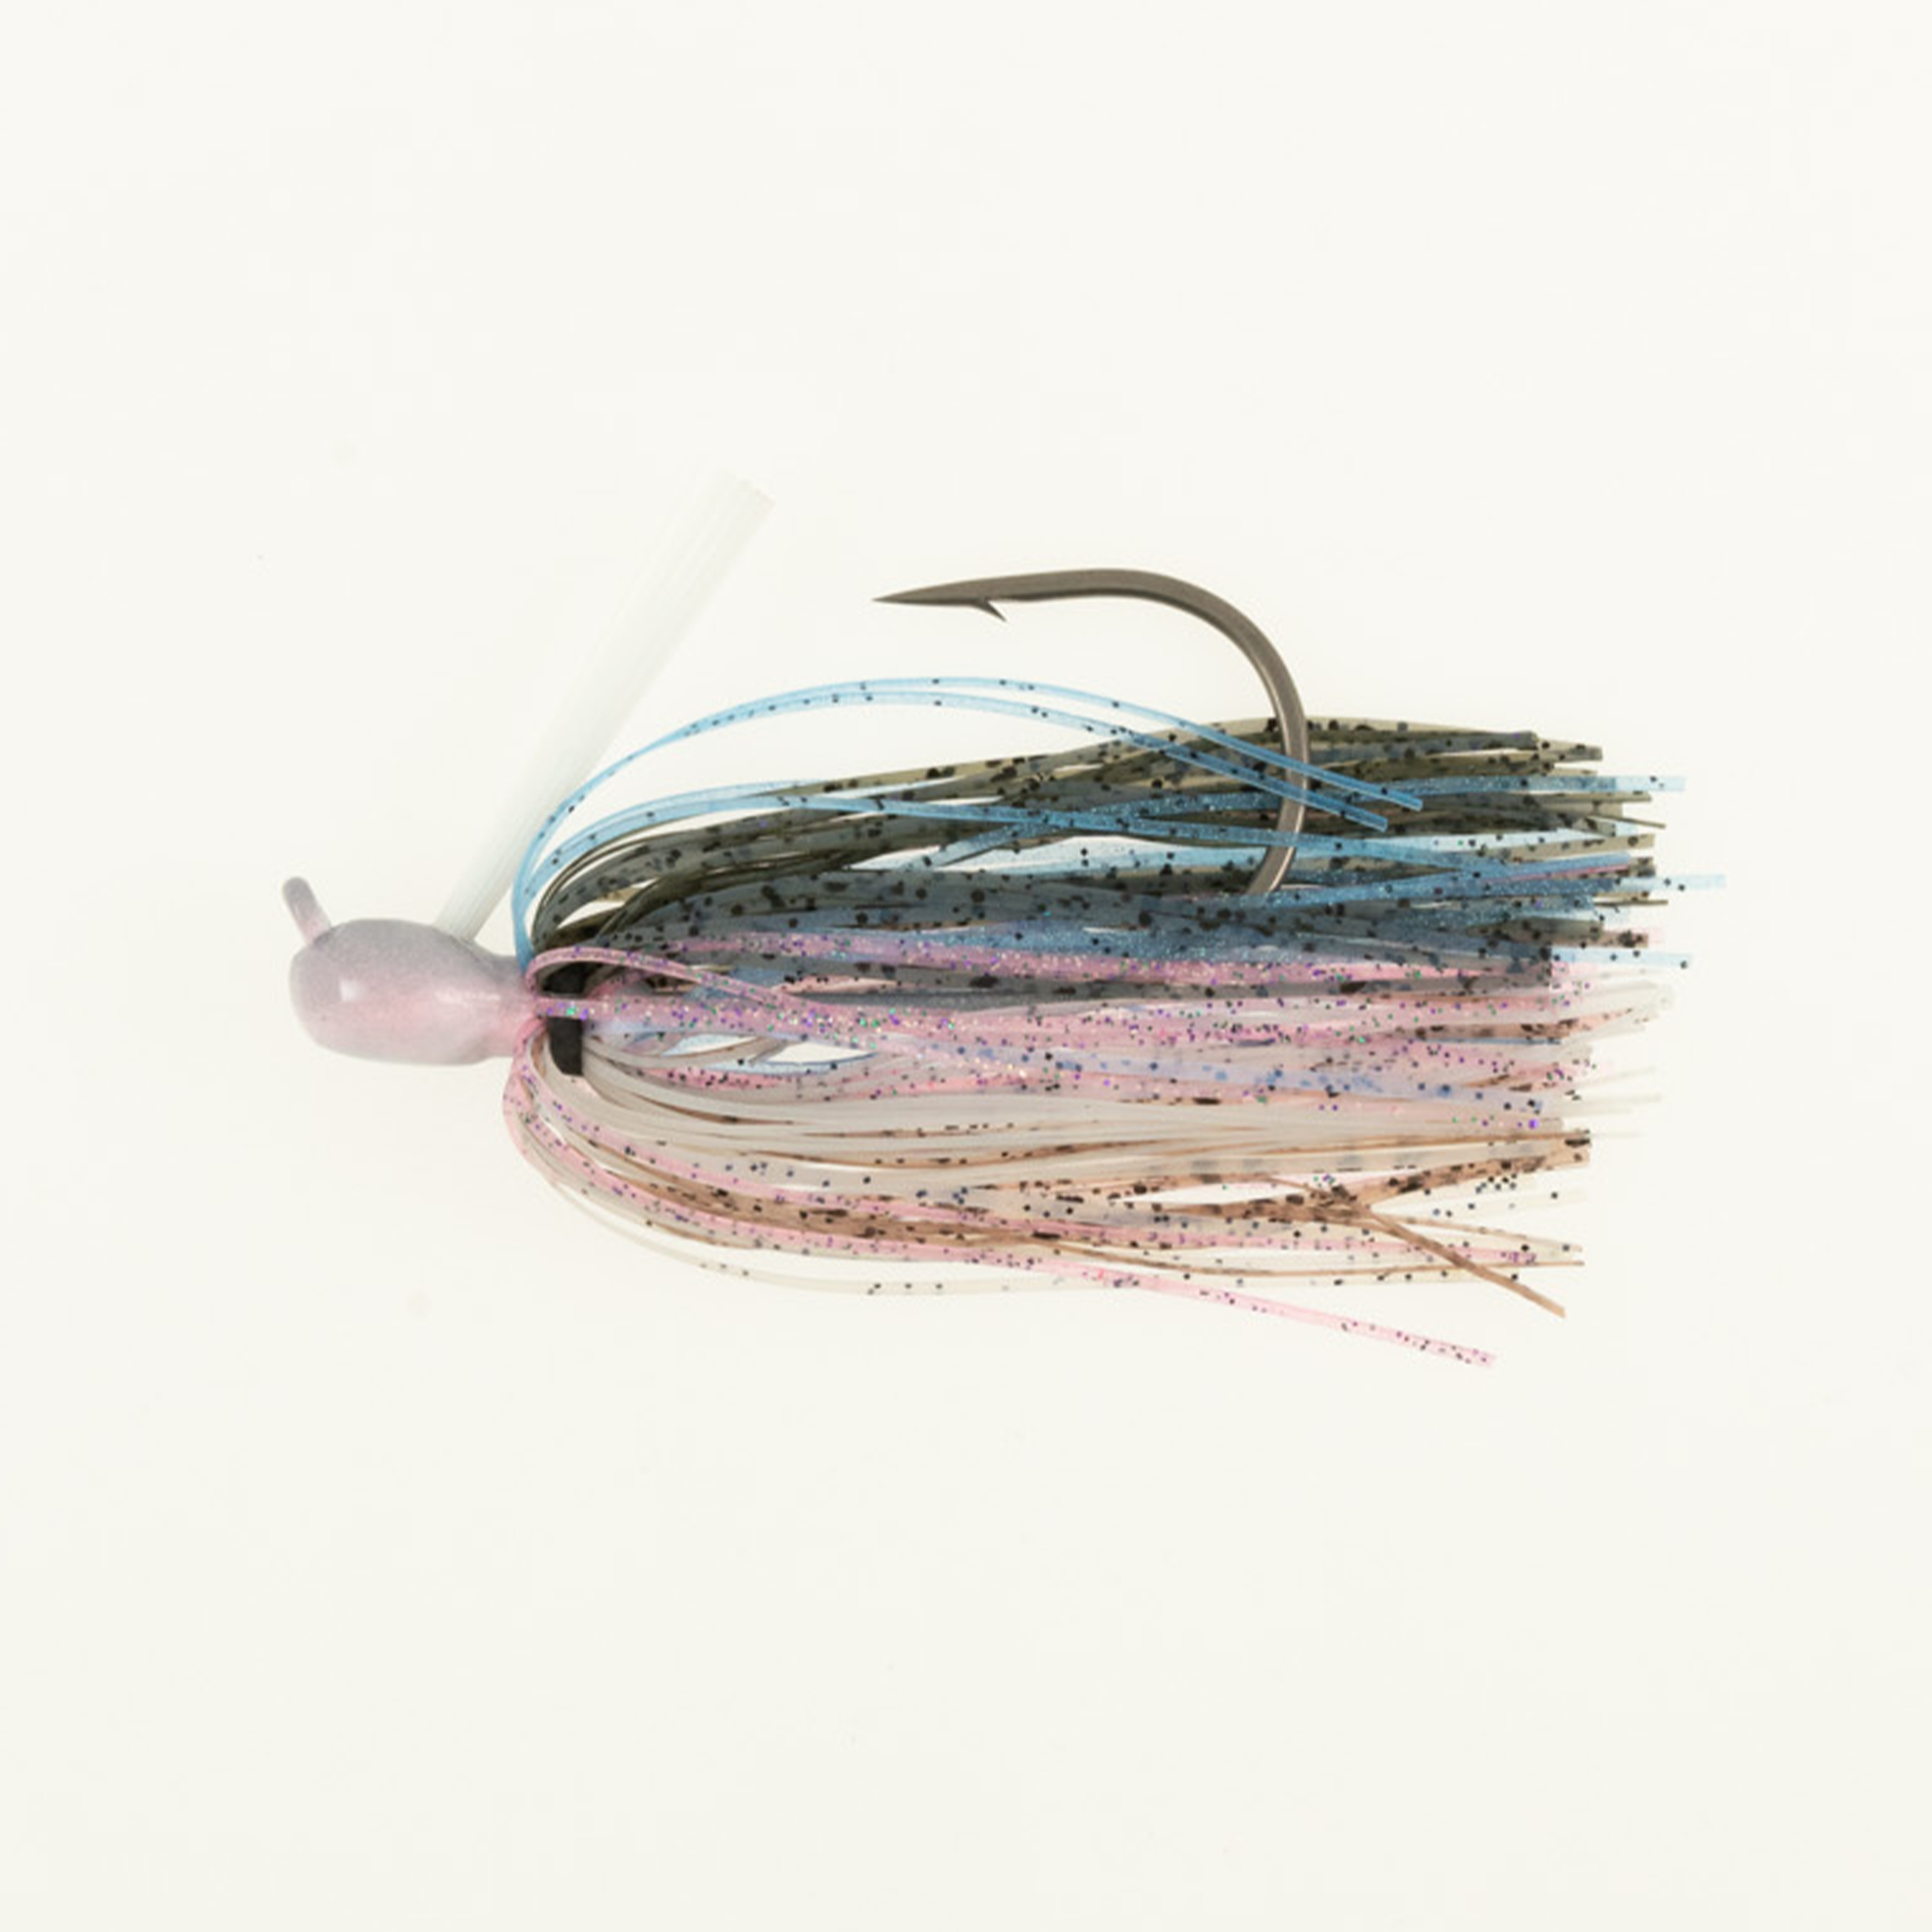 Missile Jigs - Ike's Flip Out Jig – Missile Baits